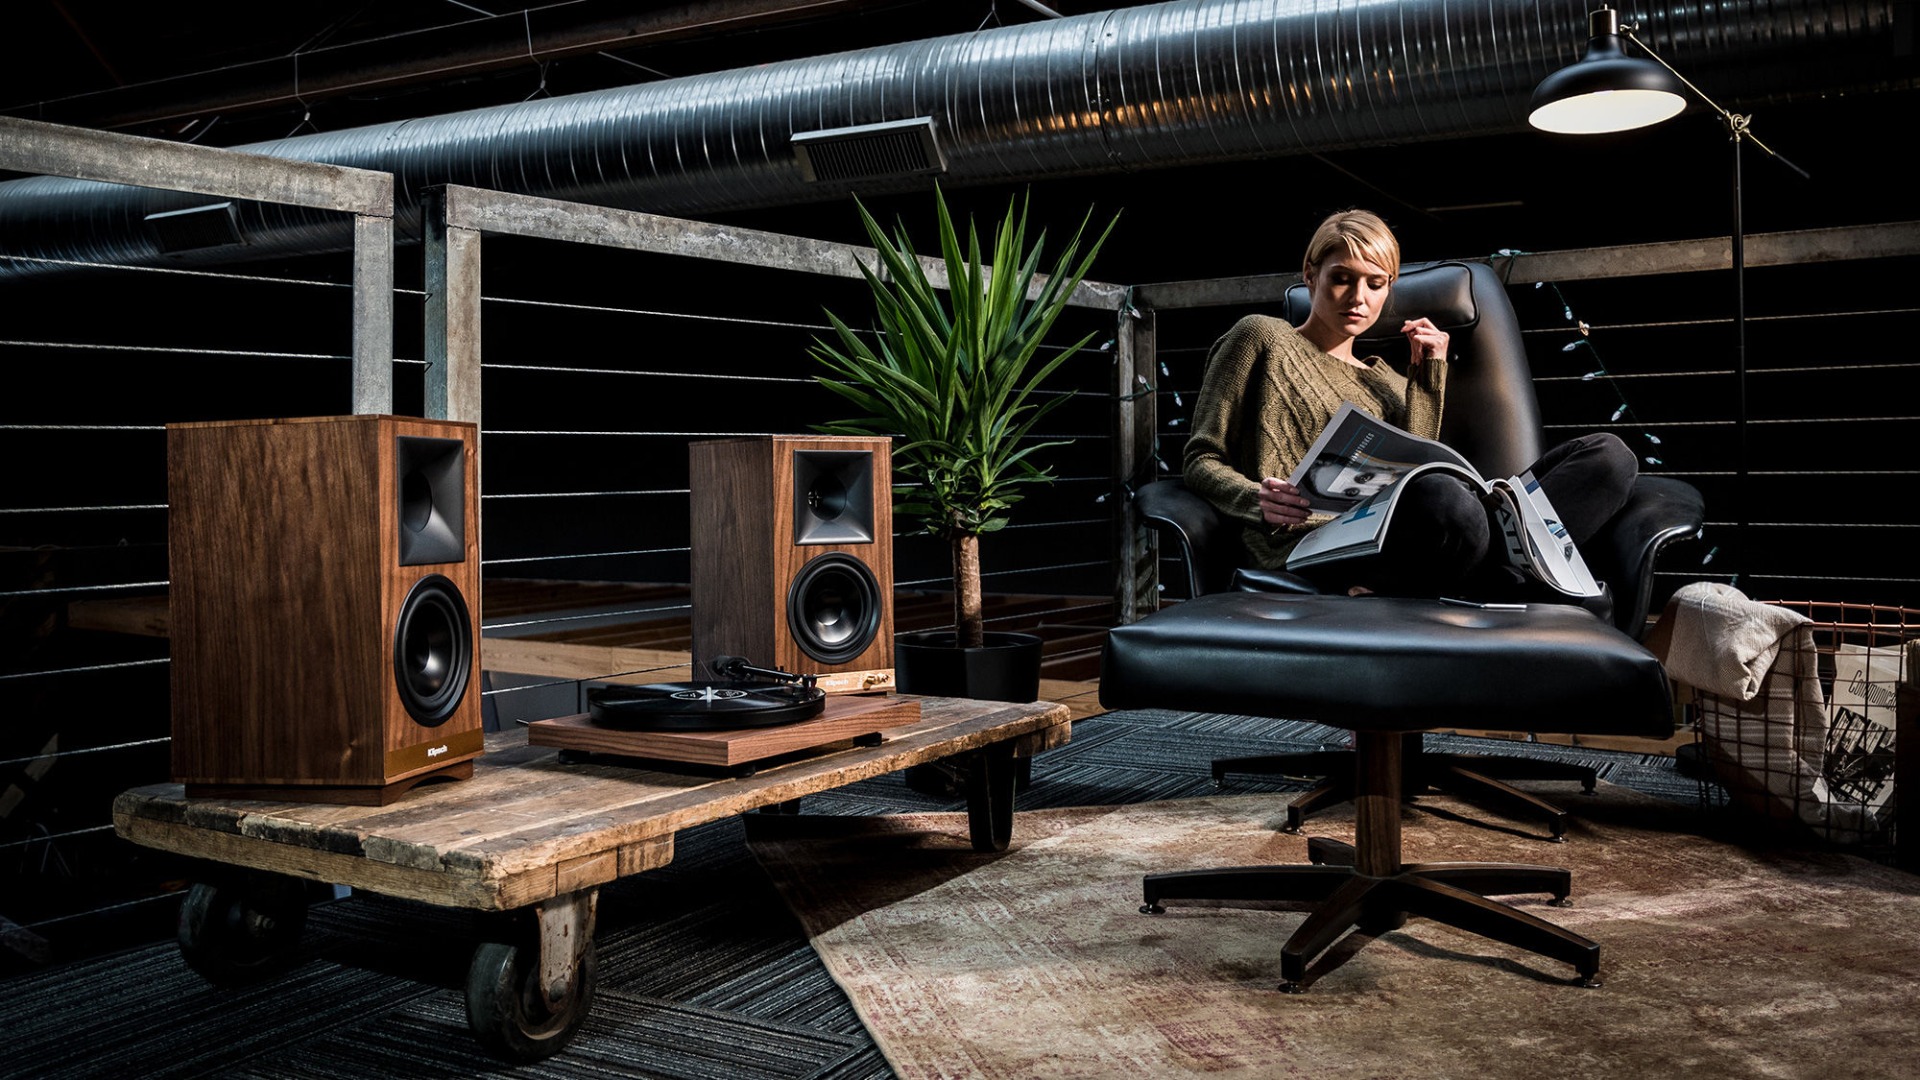 KLIPSCH THE SIXES HI-FI SOUND WITHOUT A RECEIVER